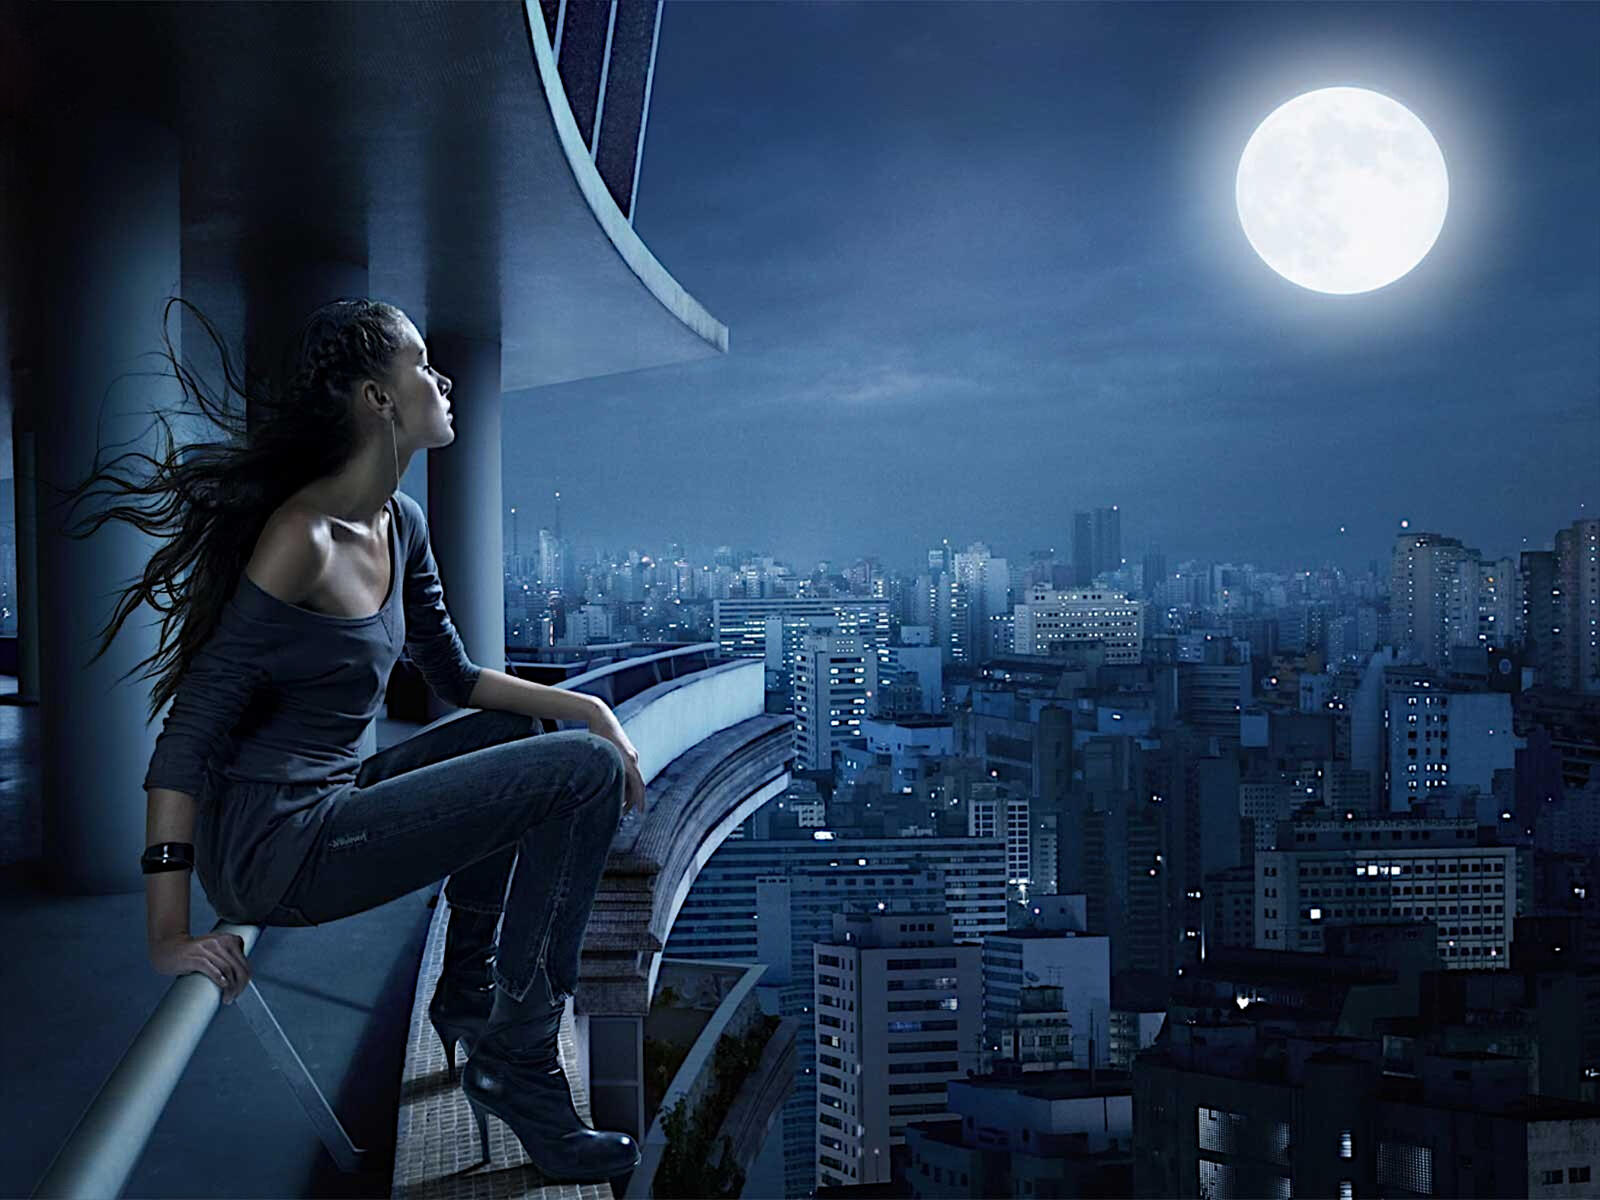 Free photo A girl sits on the edge of a rooftop admiring the city at night.